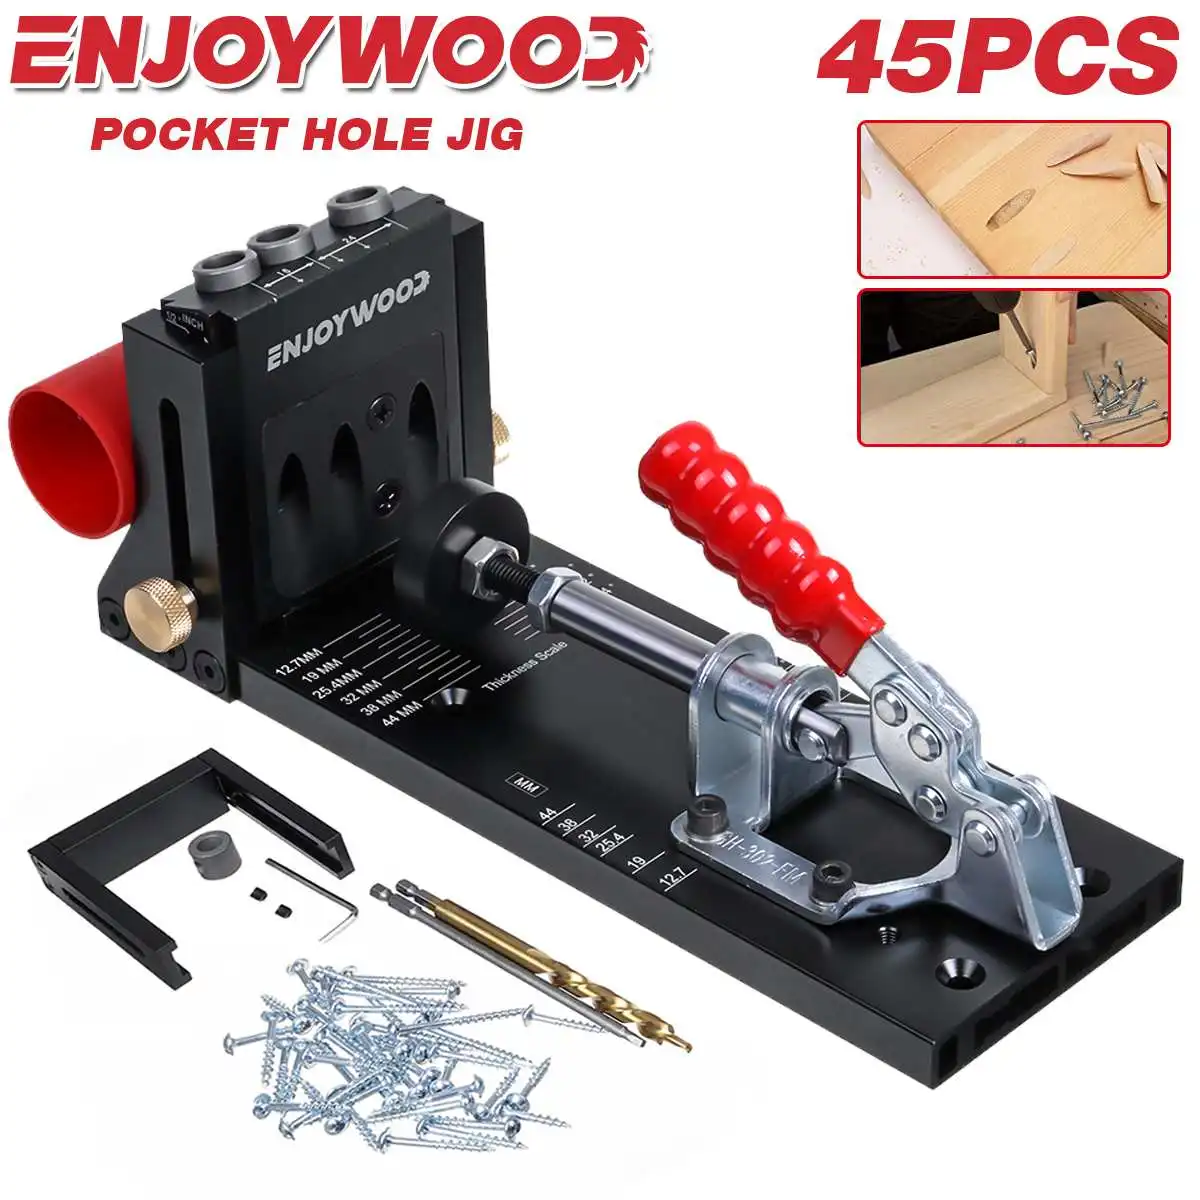 Woodworking Inclined Hole Doweling Jig Pocket Hole Jig Kit With 9.5mm Drill Bit Guide For Hole Puncher Furniture Carpentry Tools